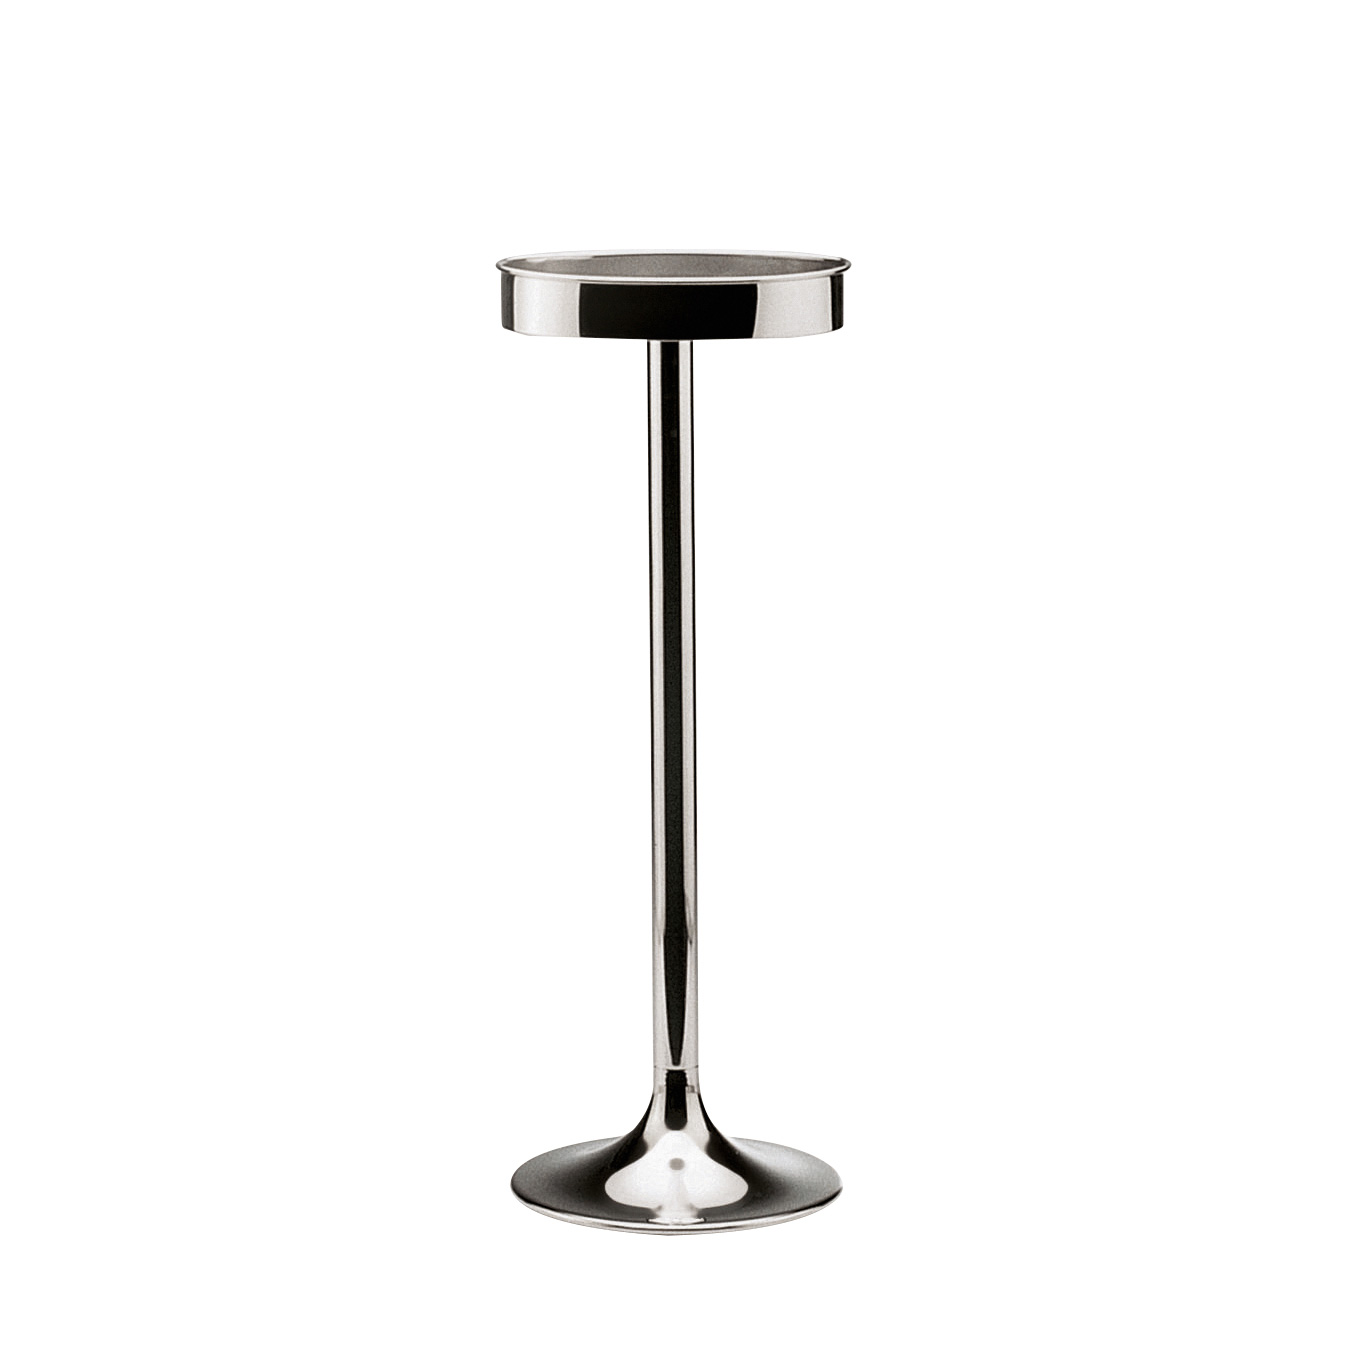 VISION STAND FOR WINE COOLER 61.5CM  S/S  Hepp GERMANY